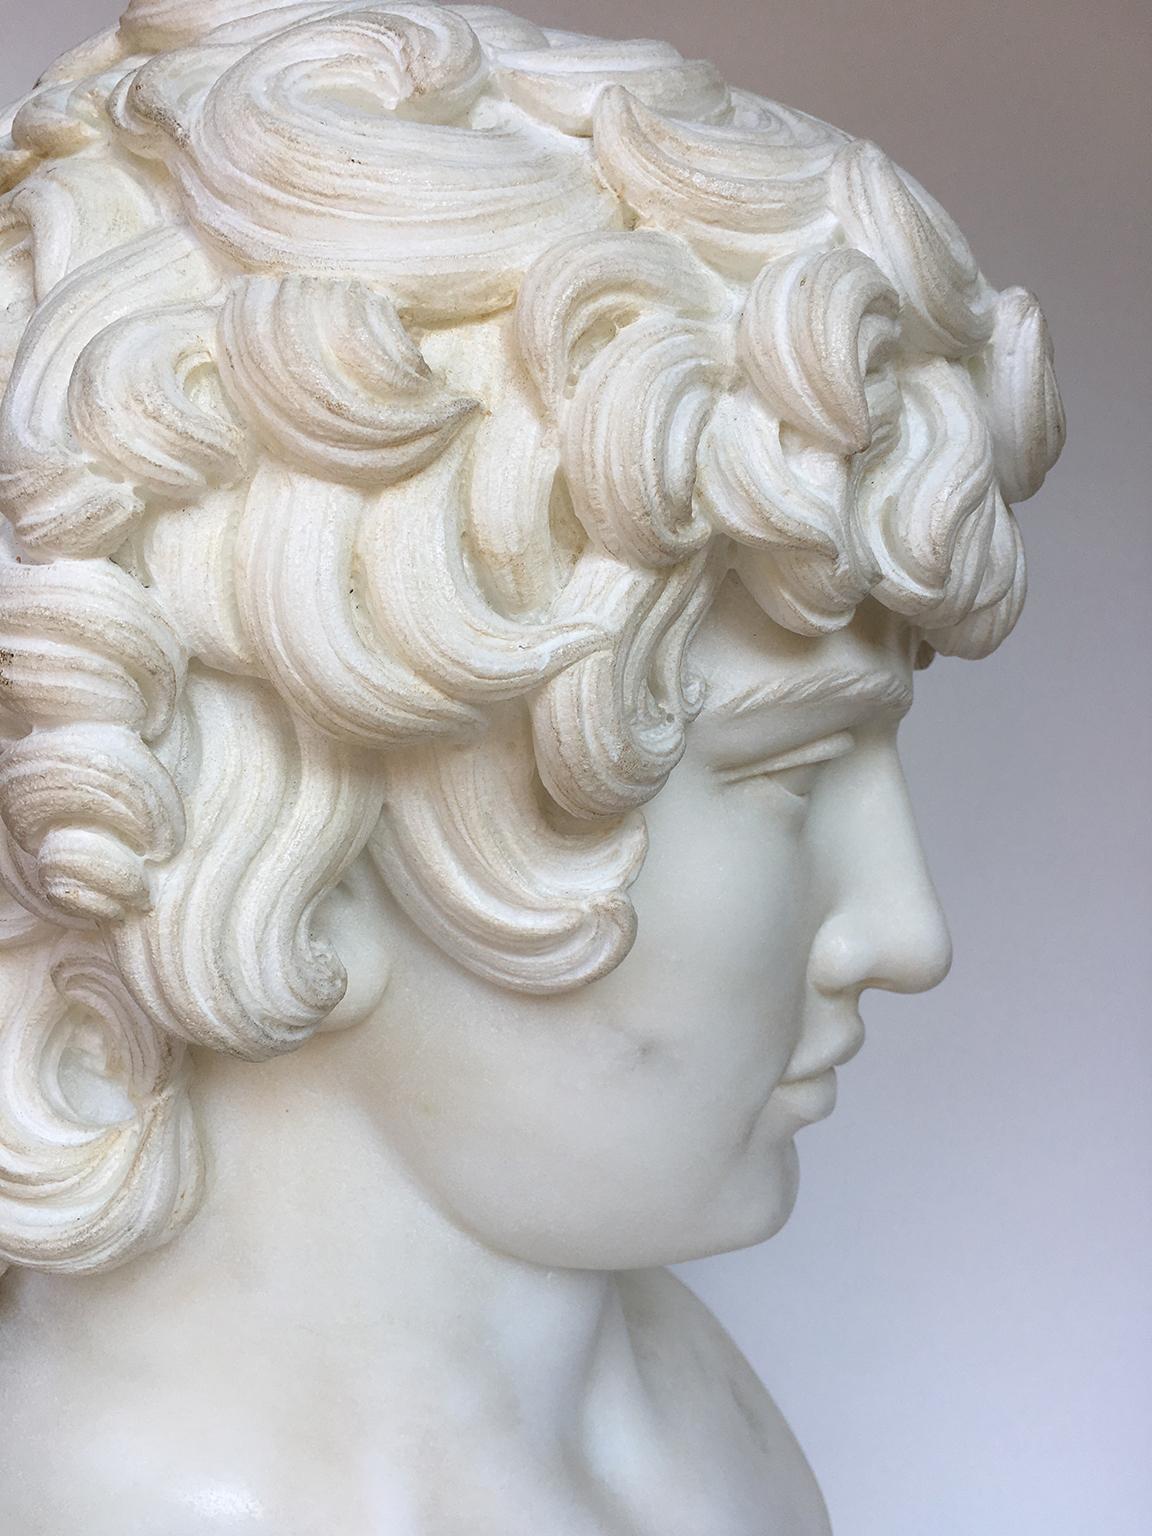 Carved Early 19th Century Italian neoclassical Sculpture, circa 1820